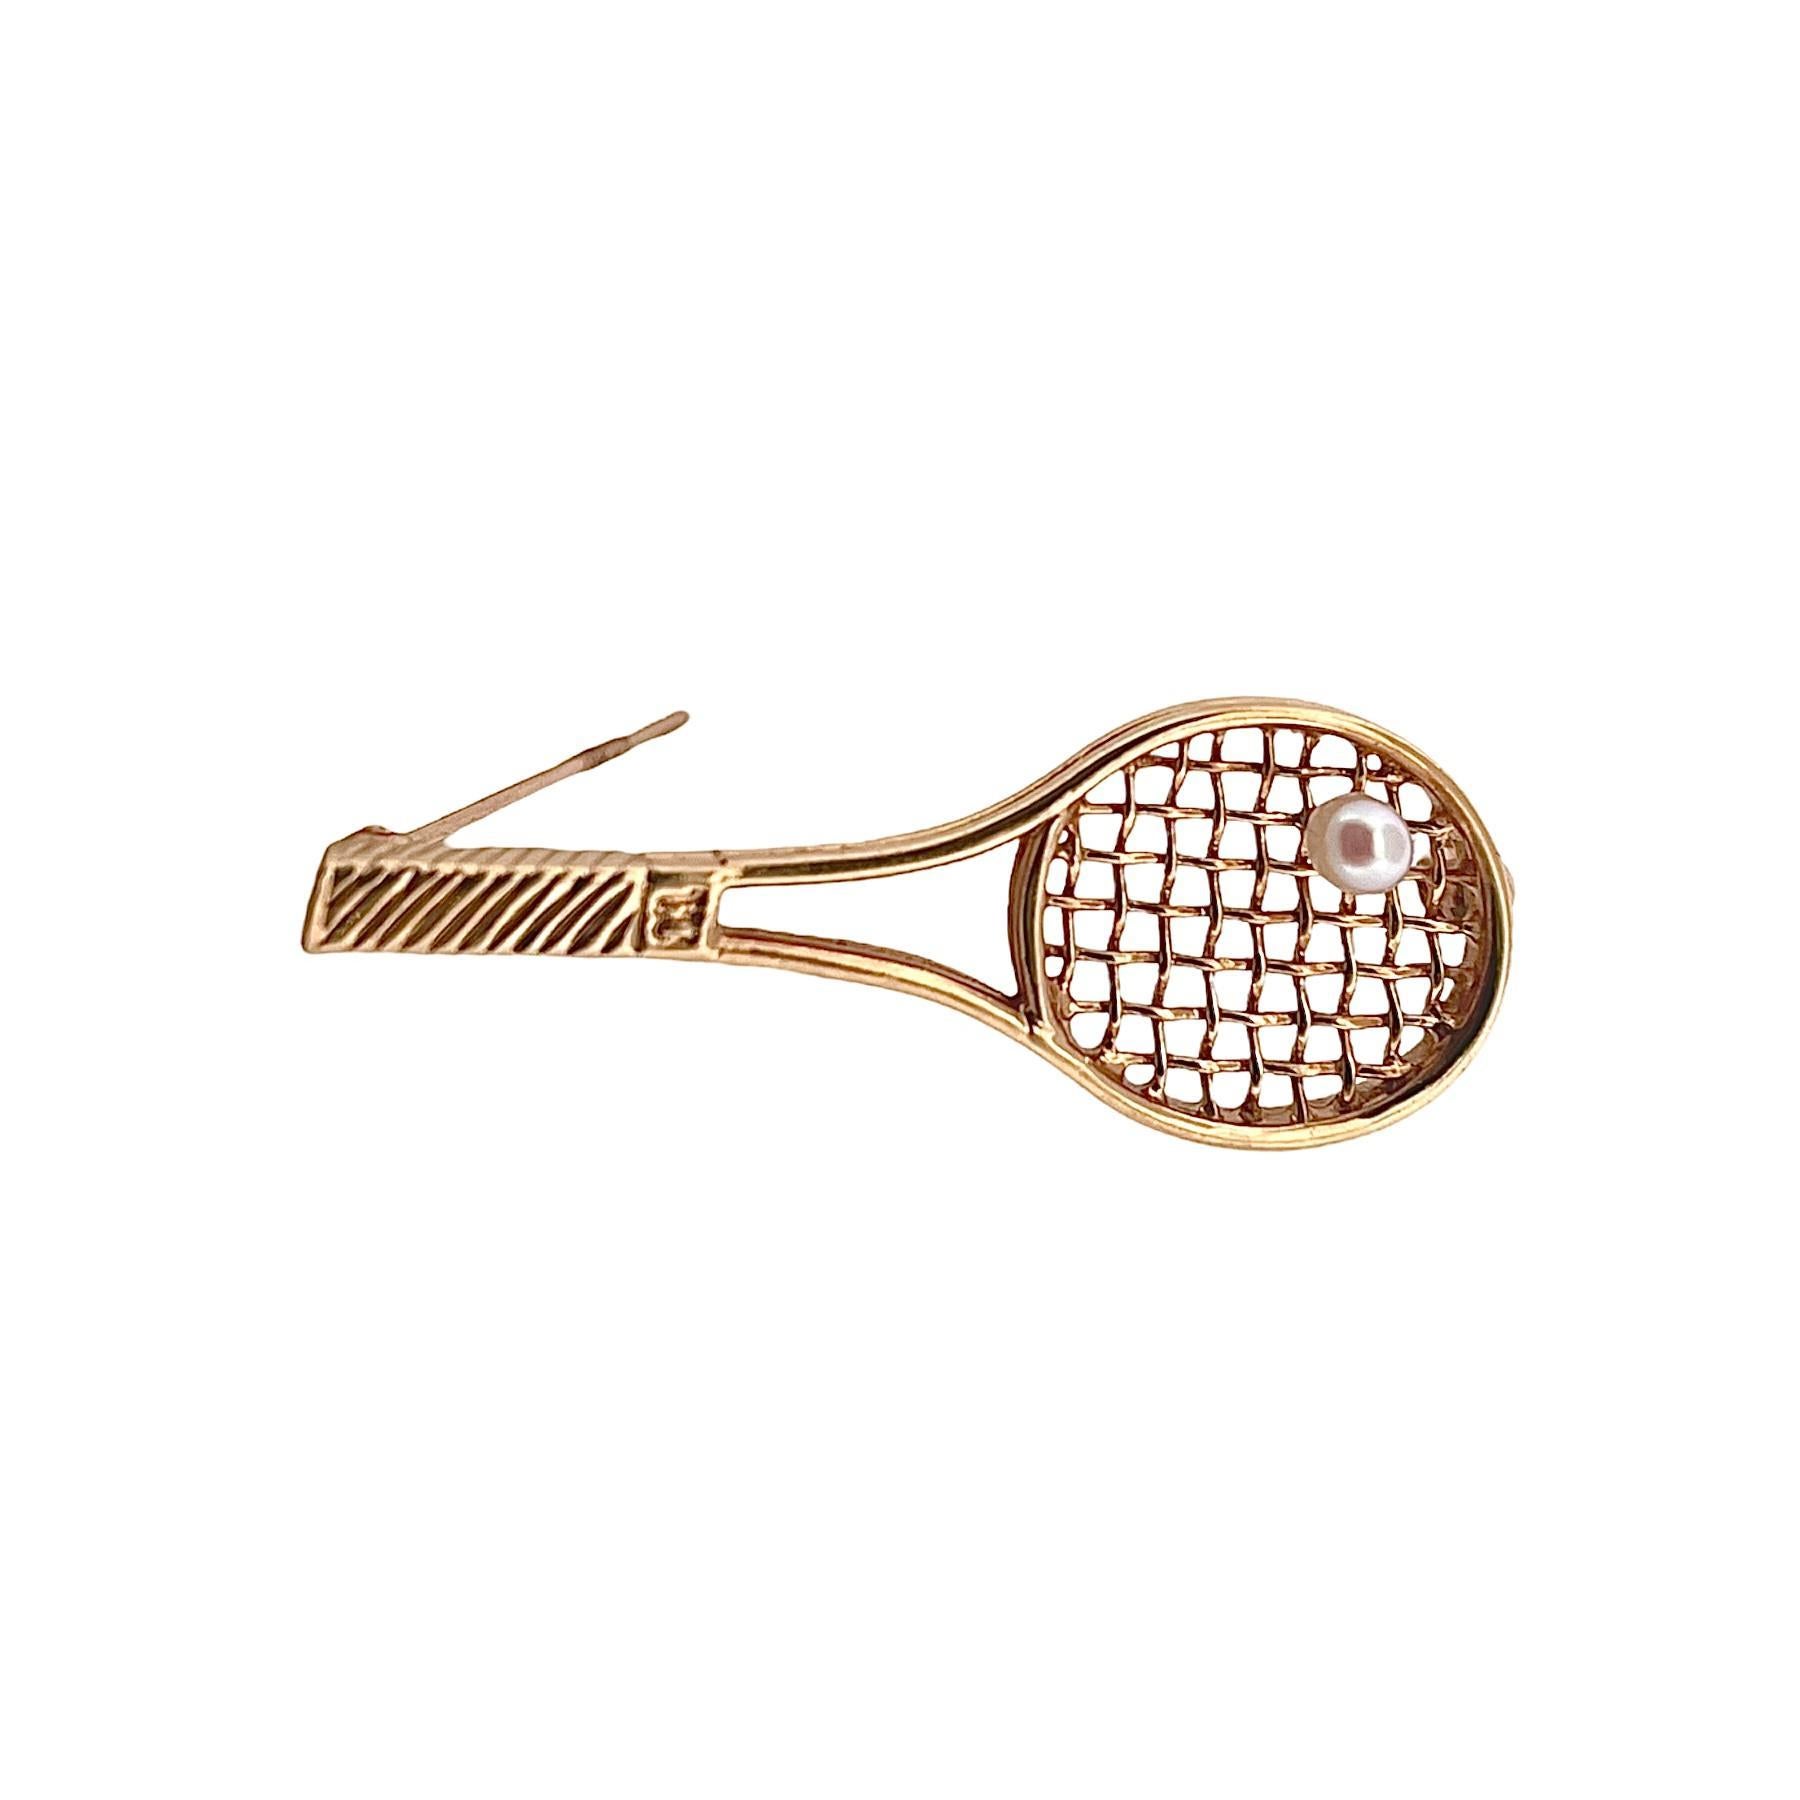 Larter & Sons Tennis Racket Brooch, a stunning piece that blends sporty elegance with timeless charm. Crafted in radiant 14K yellow gold.
At the heart of the brooch, a dainty 3.5mm pearl serves as the tennis ball, adding a touch of sophistication to